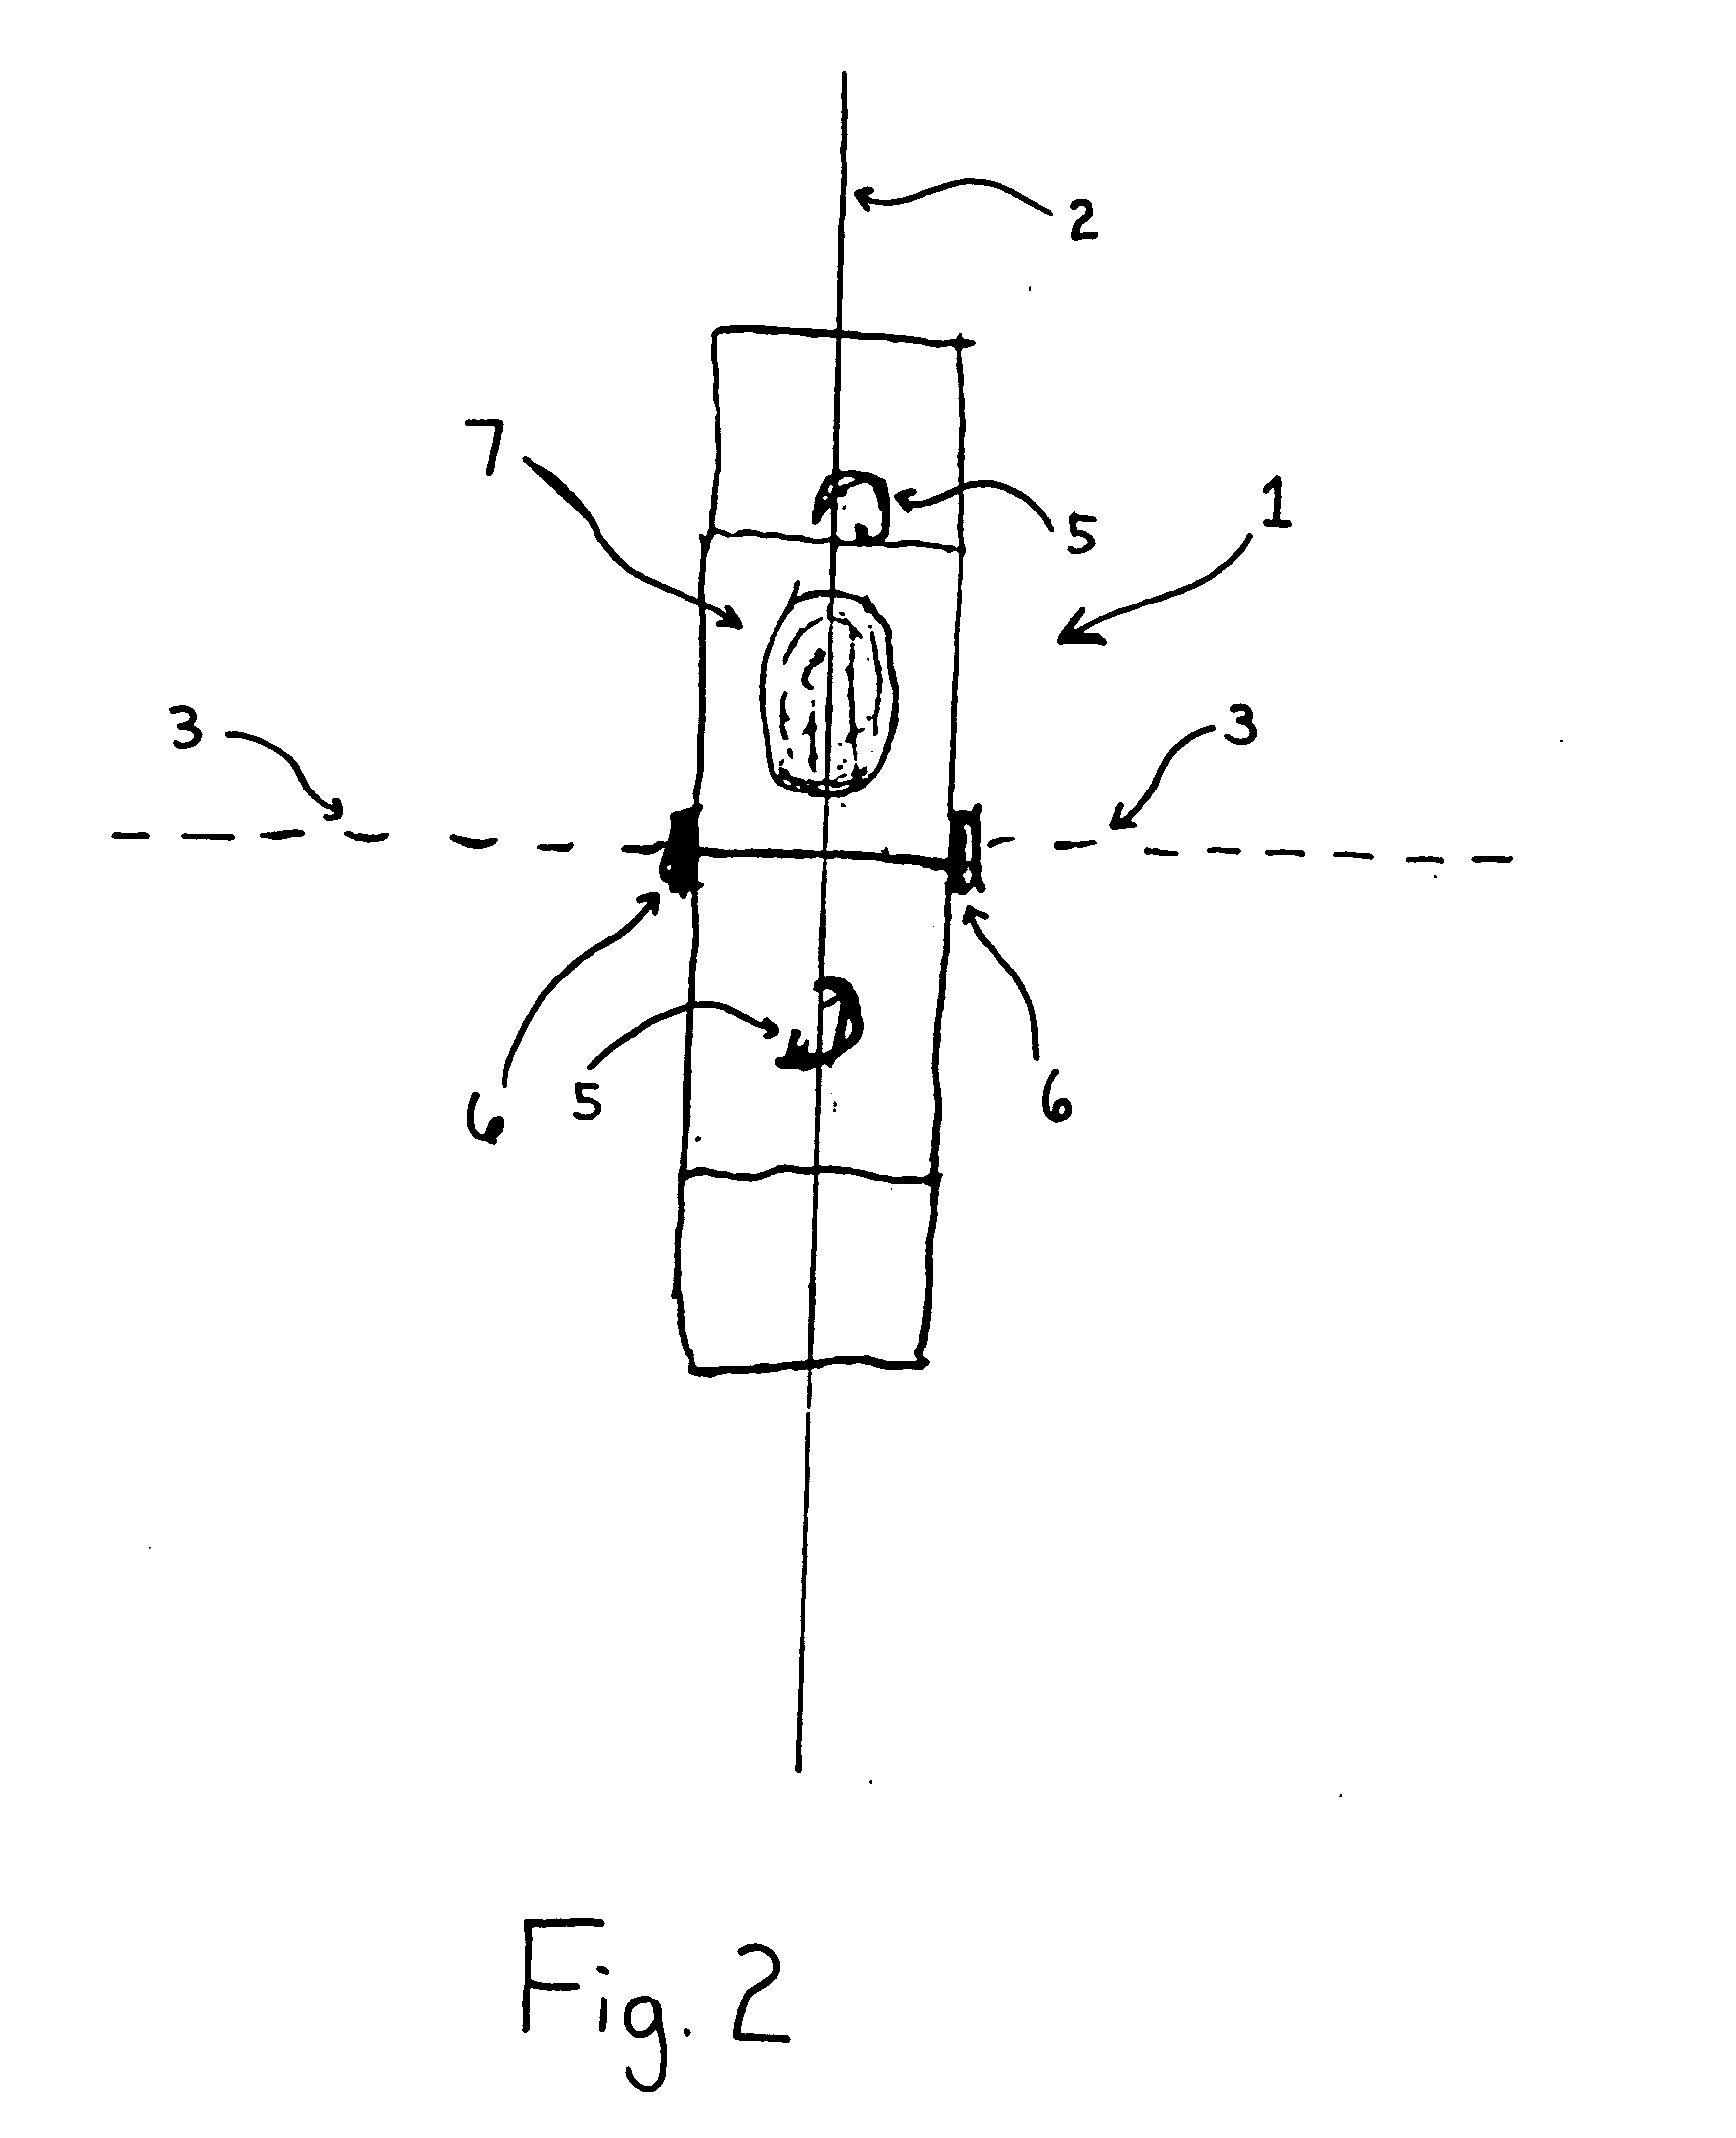 Measuring arrangement to determine location of corners for a building foundation and a wooden base frame, and the use thereof